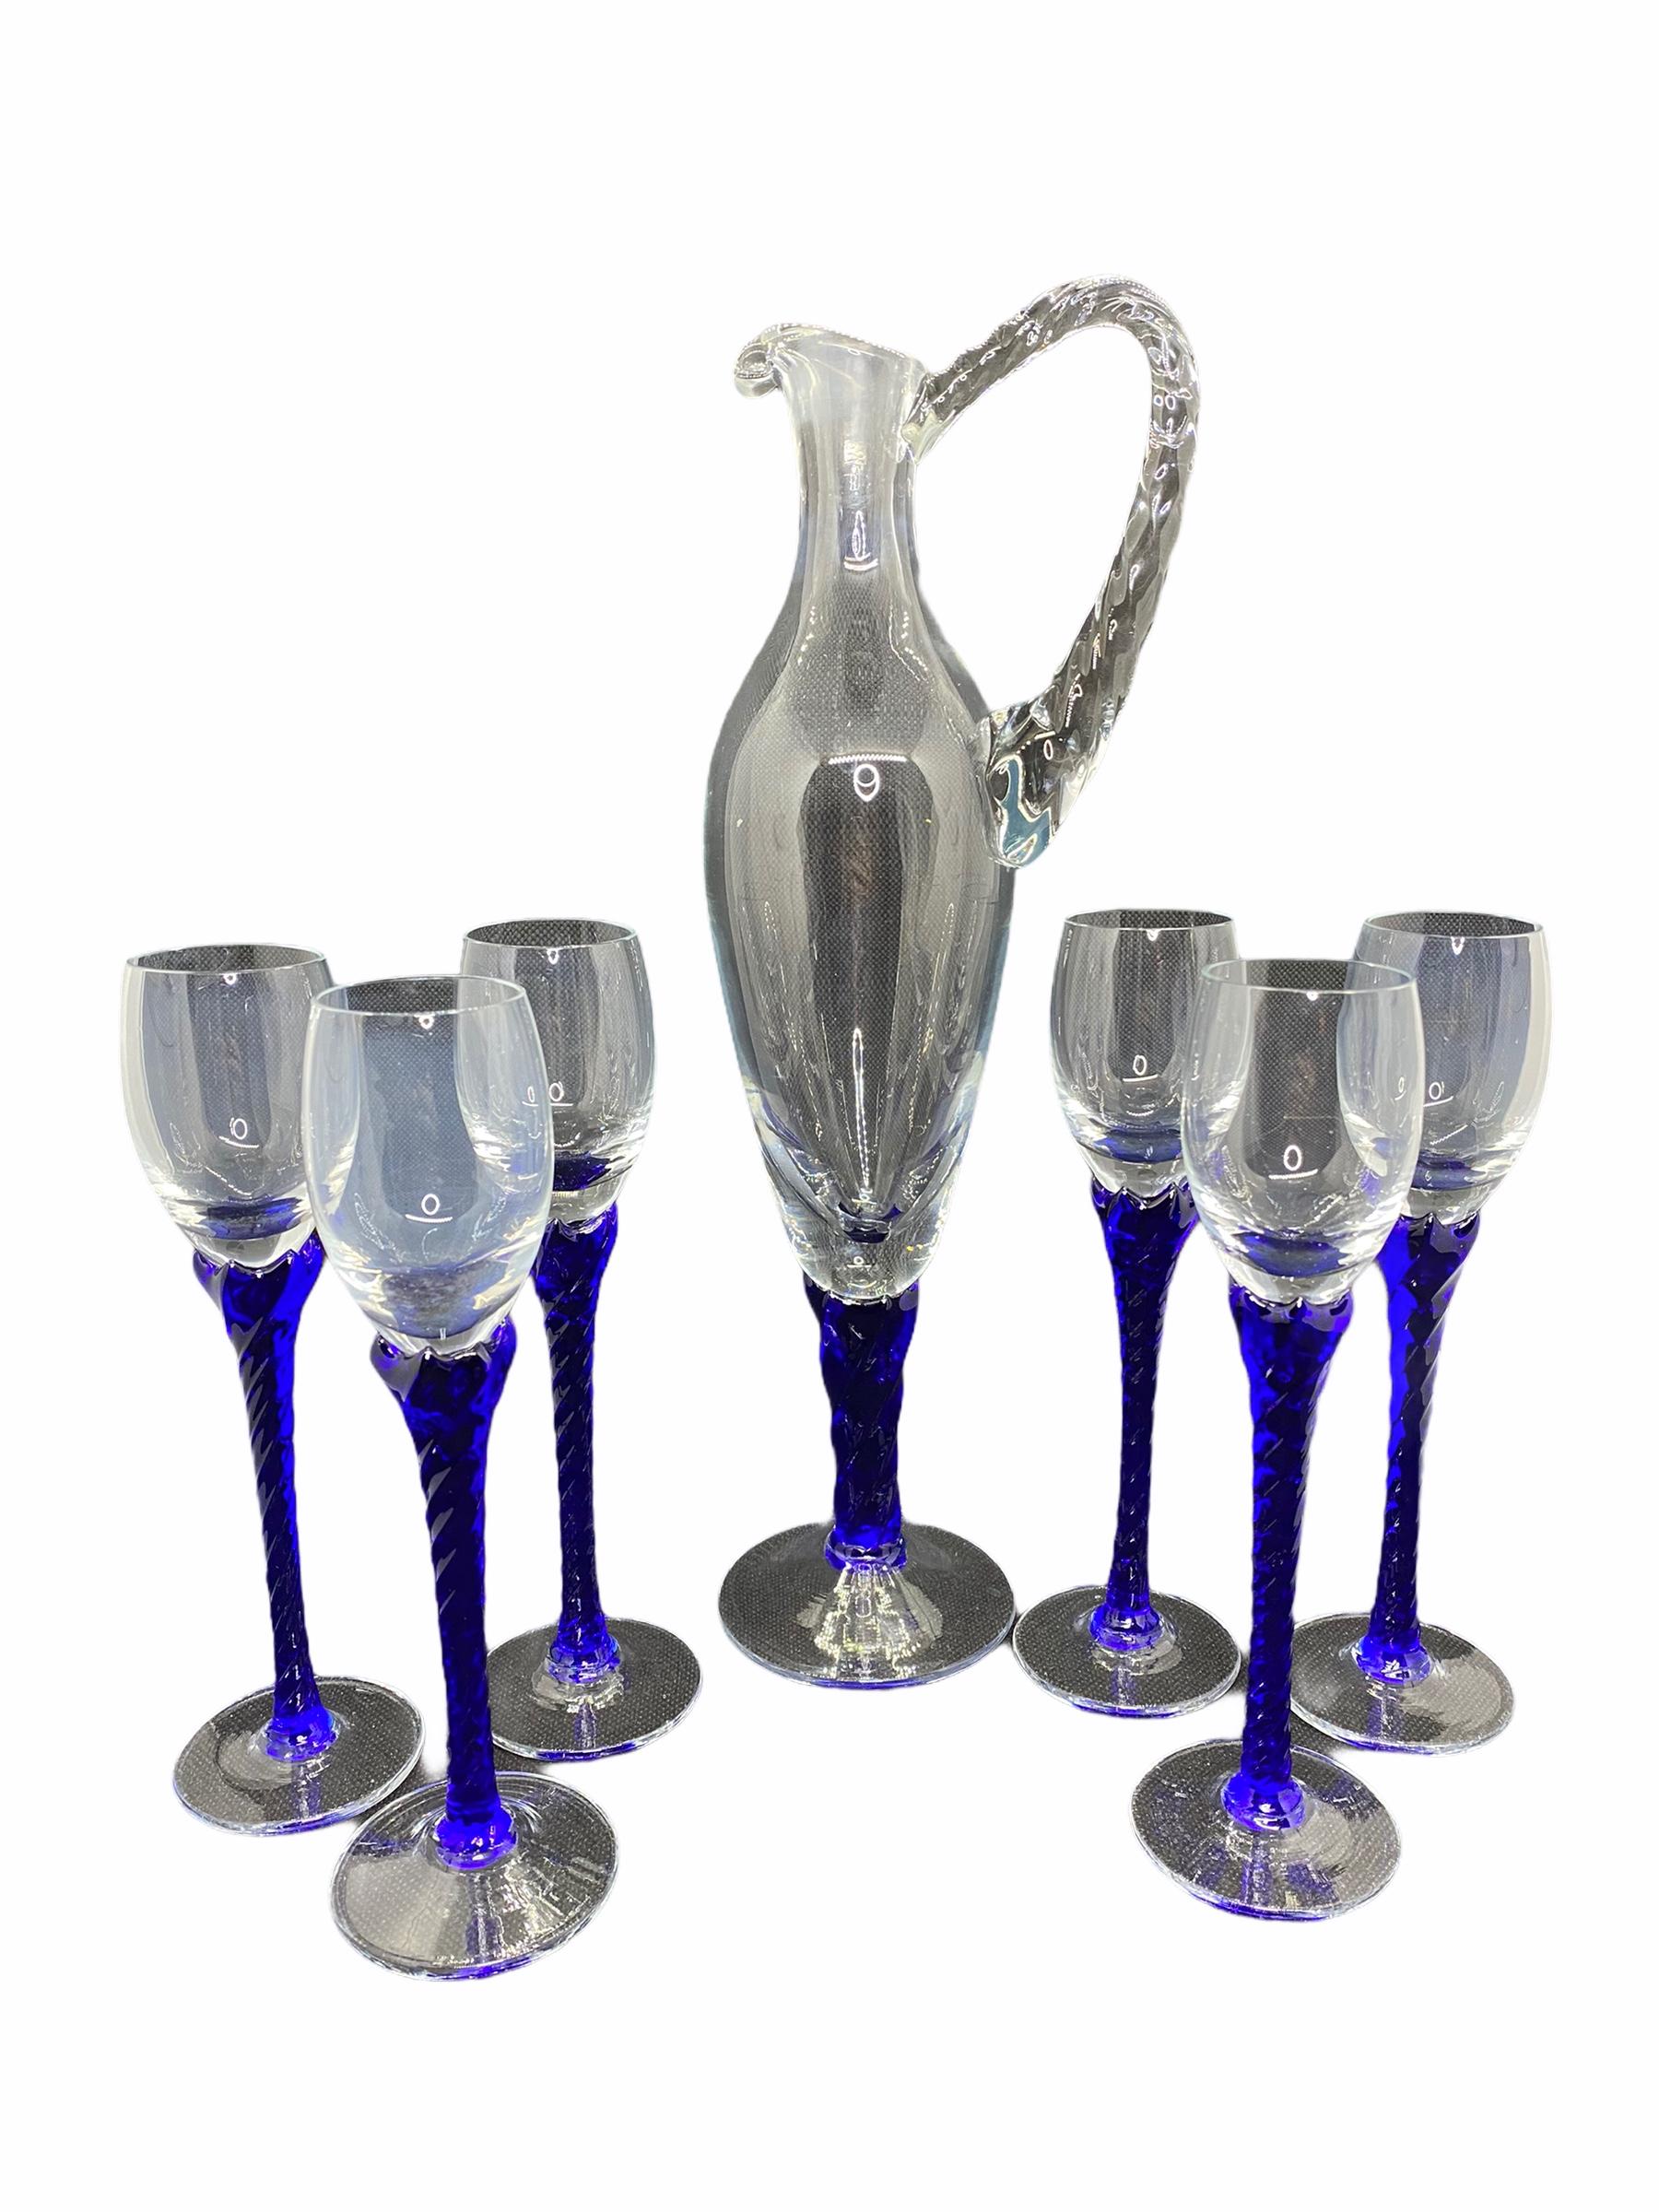 Set of six beautiful glasses and a decanter. Very good vintage condition, consistent with age and use. Decanter is approx. 11 7/8